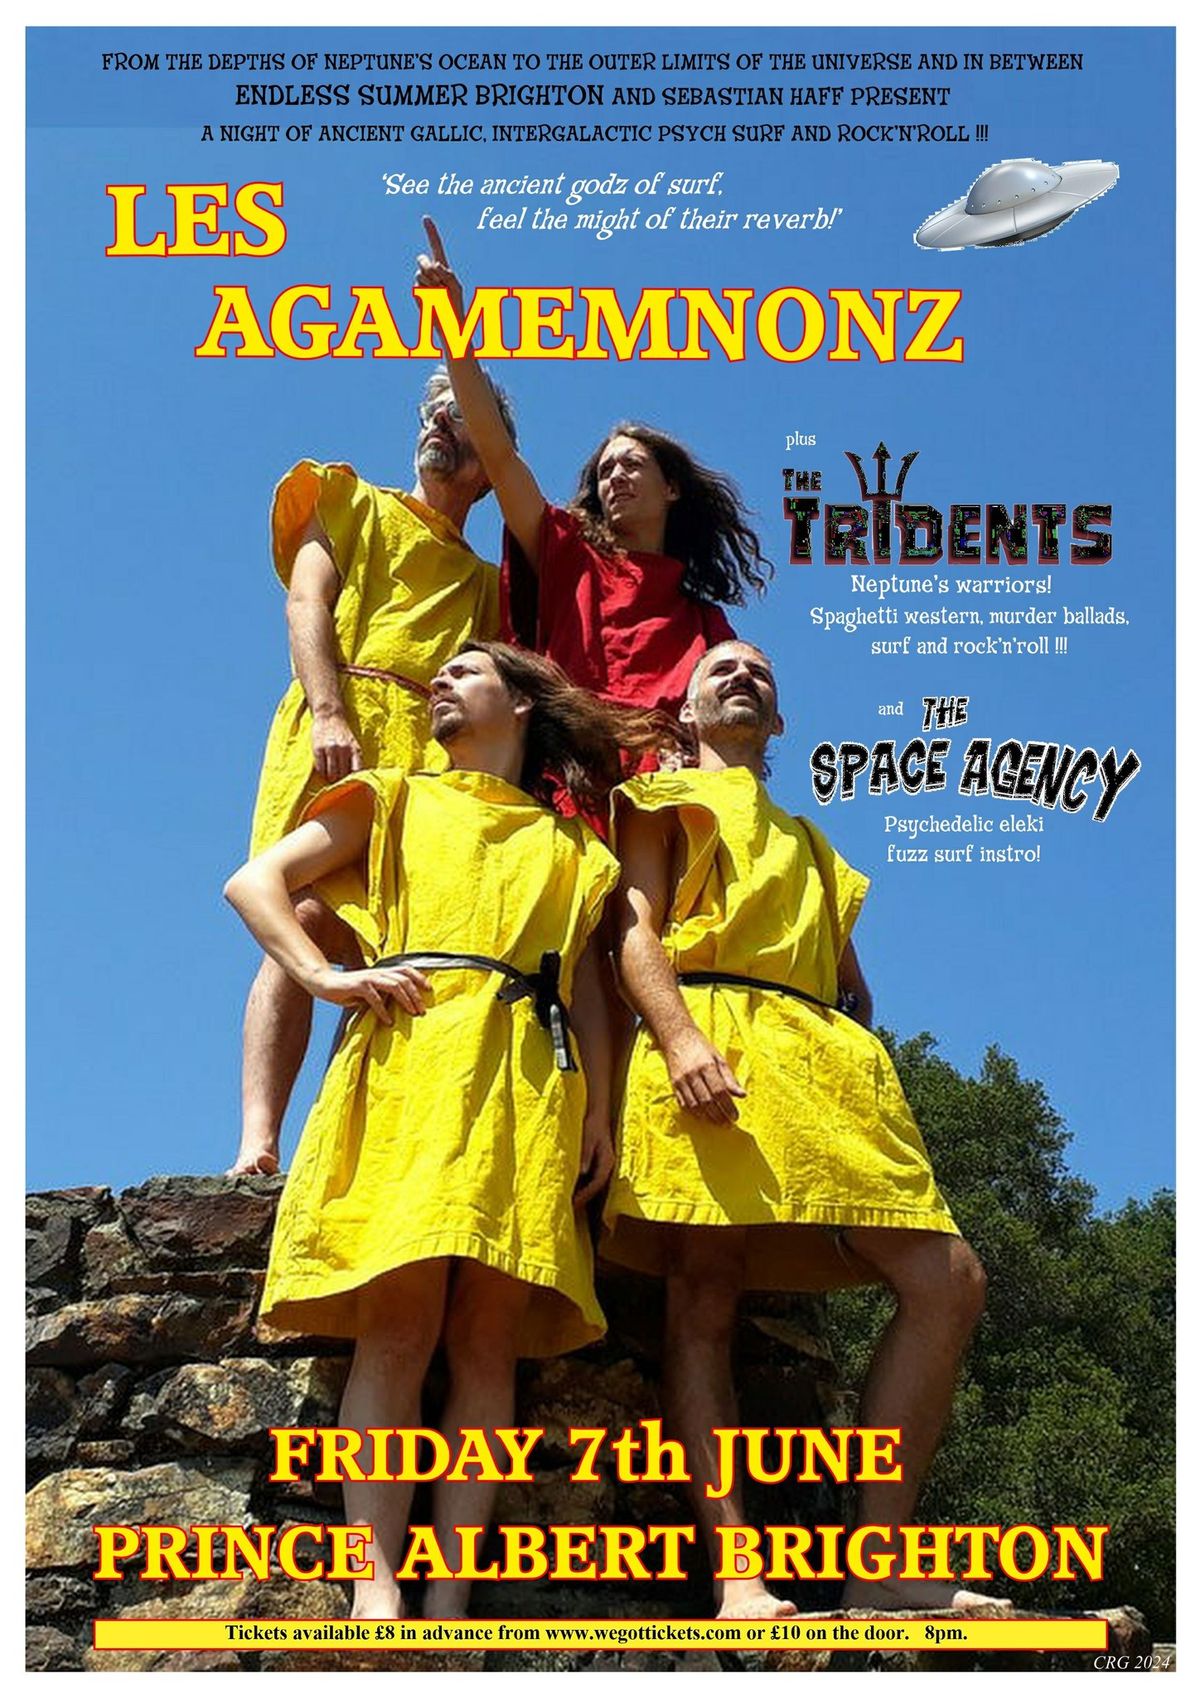 Les Agamemnonz at The Prince Albert